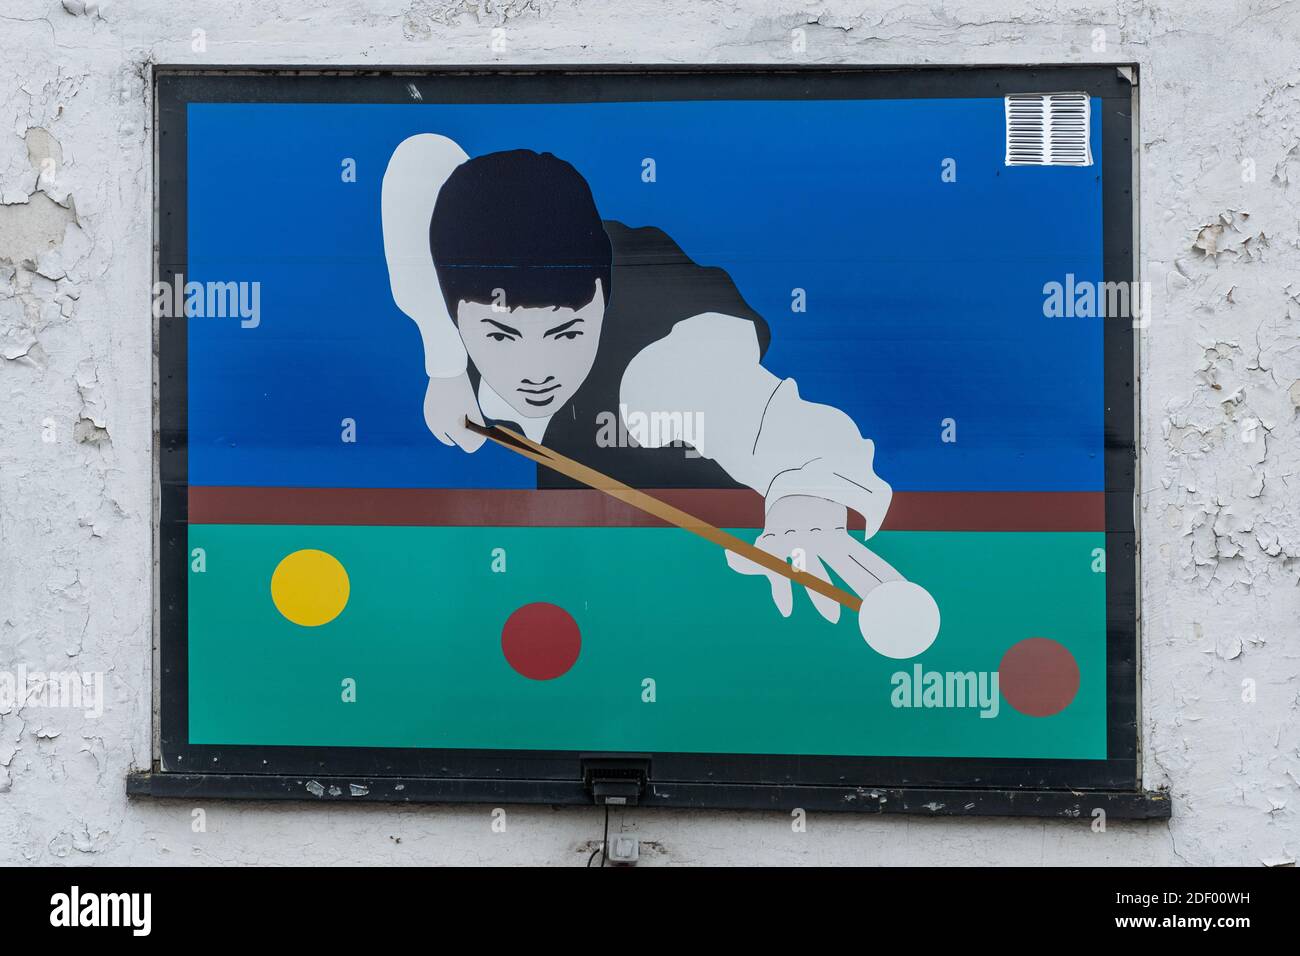 Snooker artwork on a snooker hall wall Stock Photo